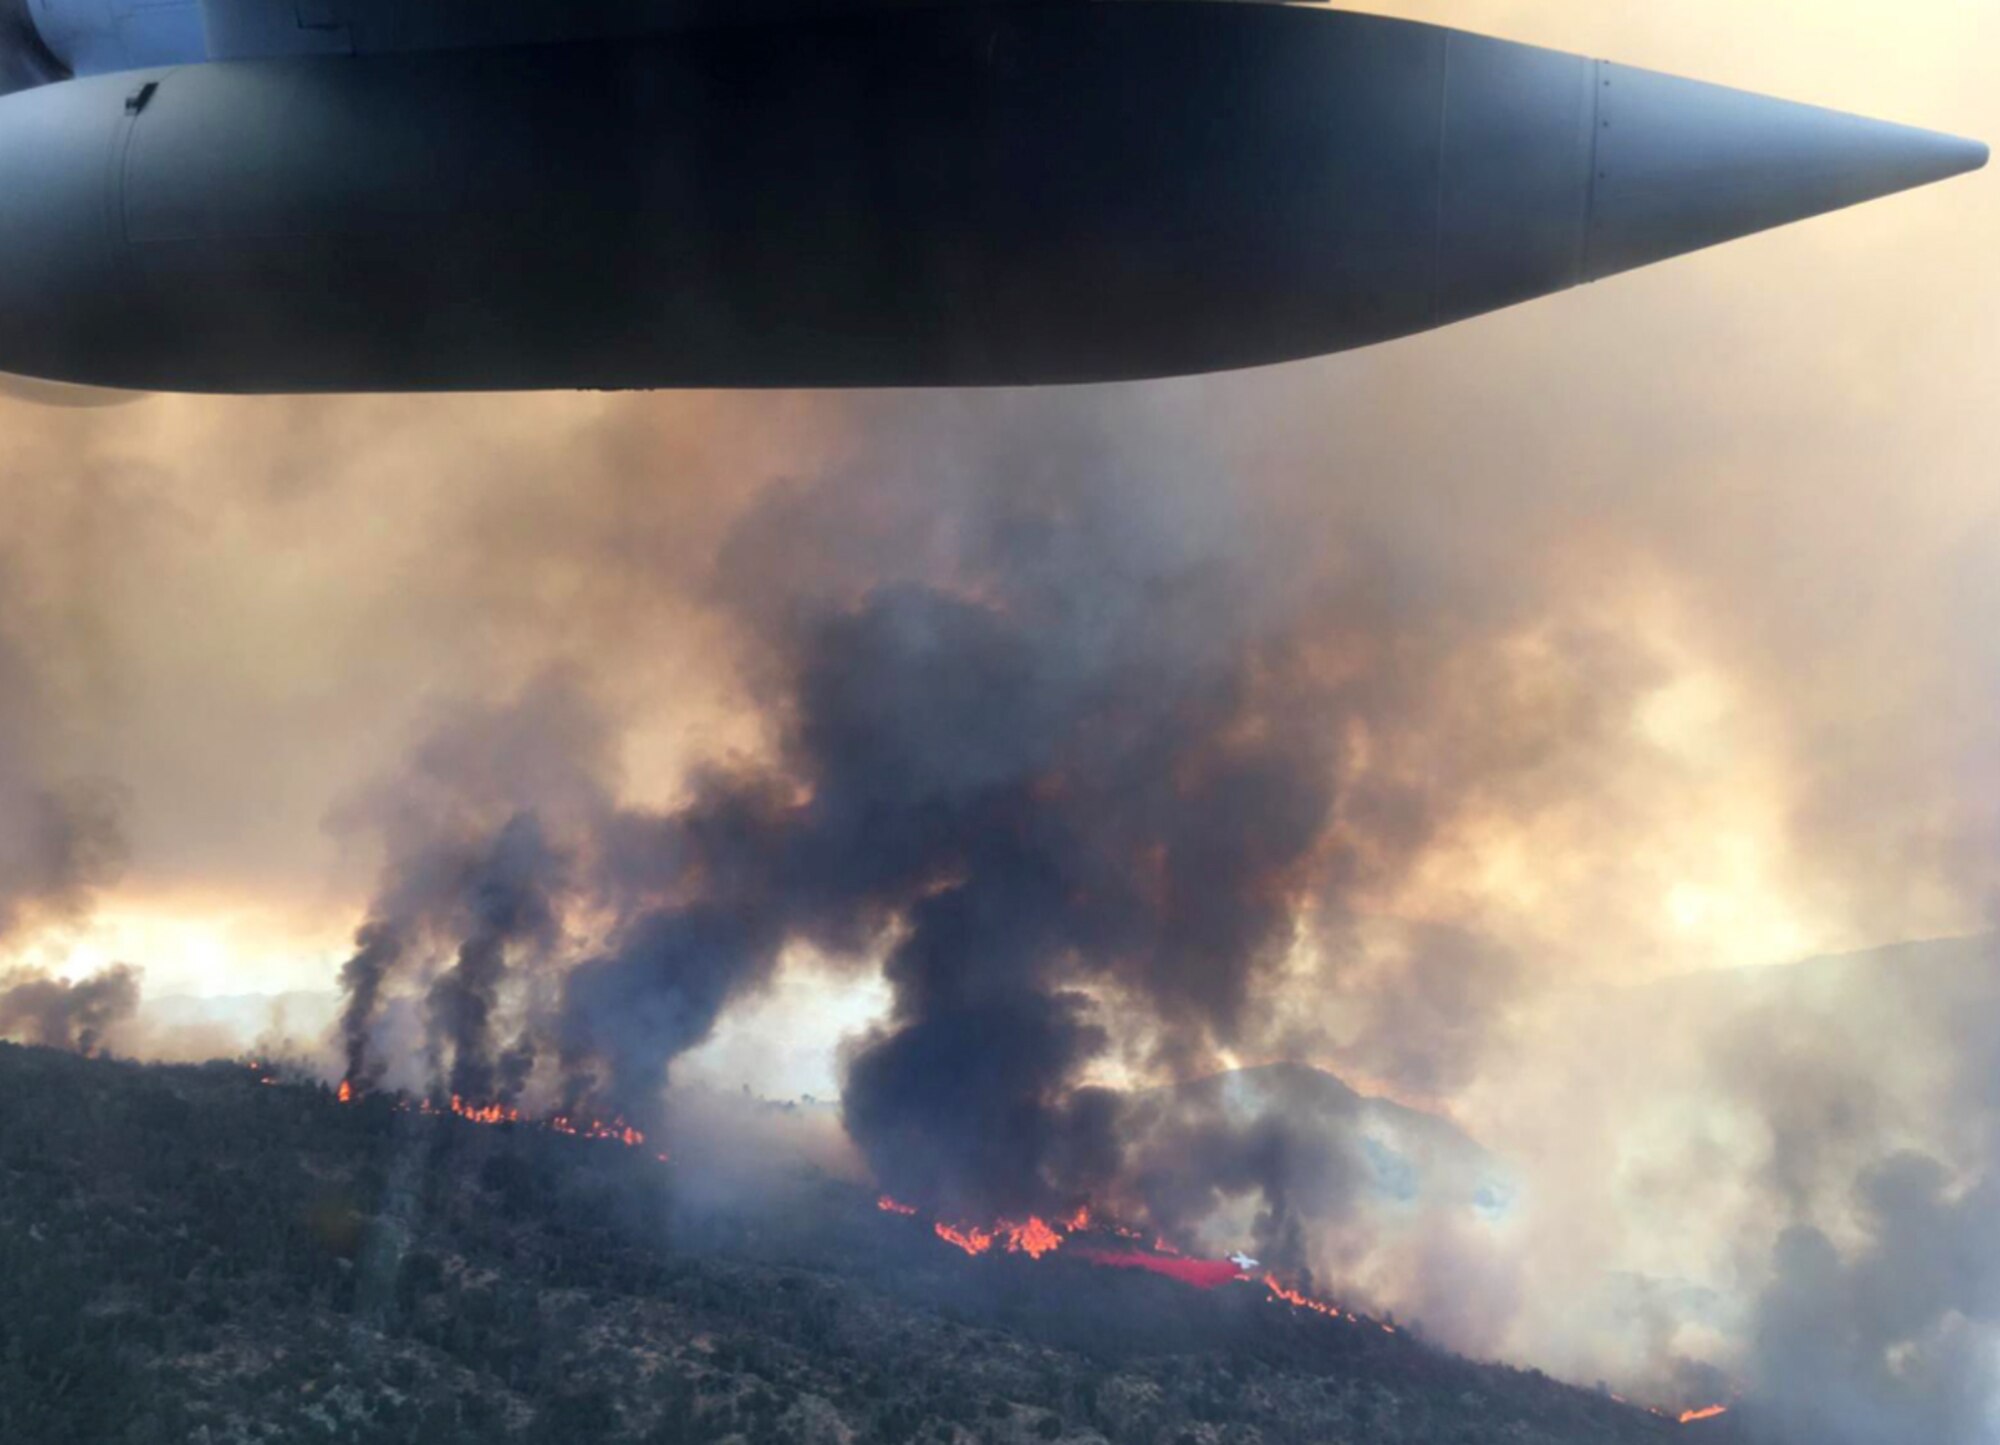 A C-130H from the U.S. Air Force Reserve’s Colorado-based 302nd Airlift Wing, equipped with the Modular Airborne Firefighting System, flies over fires near Sacramento, California, after dropping retardant Aug. 3, 2020.